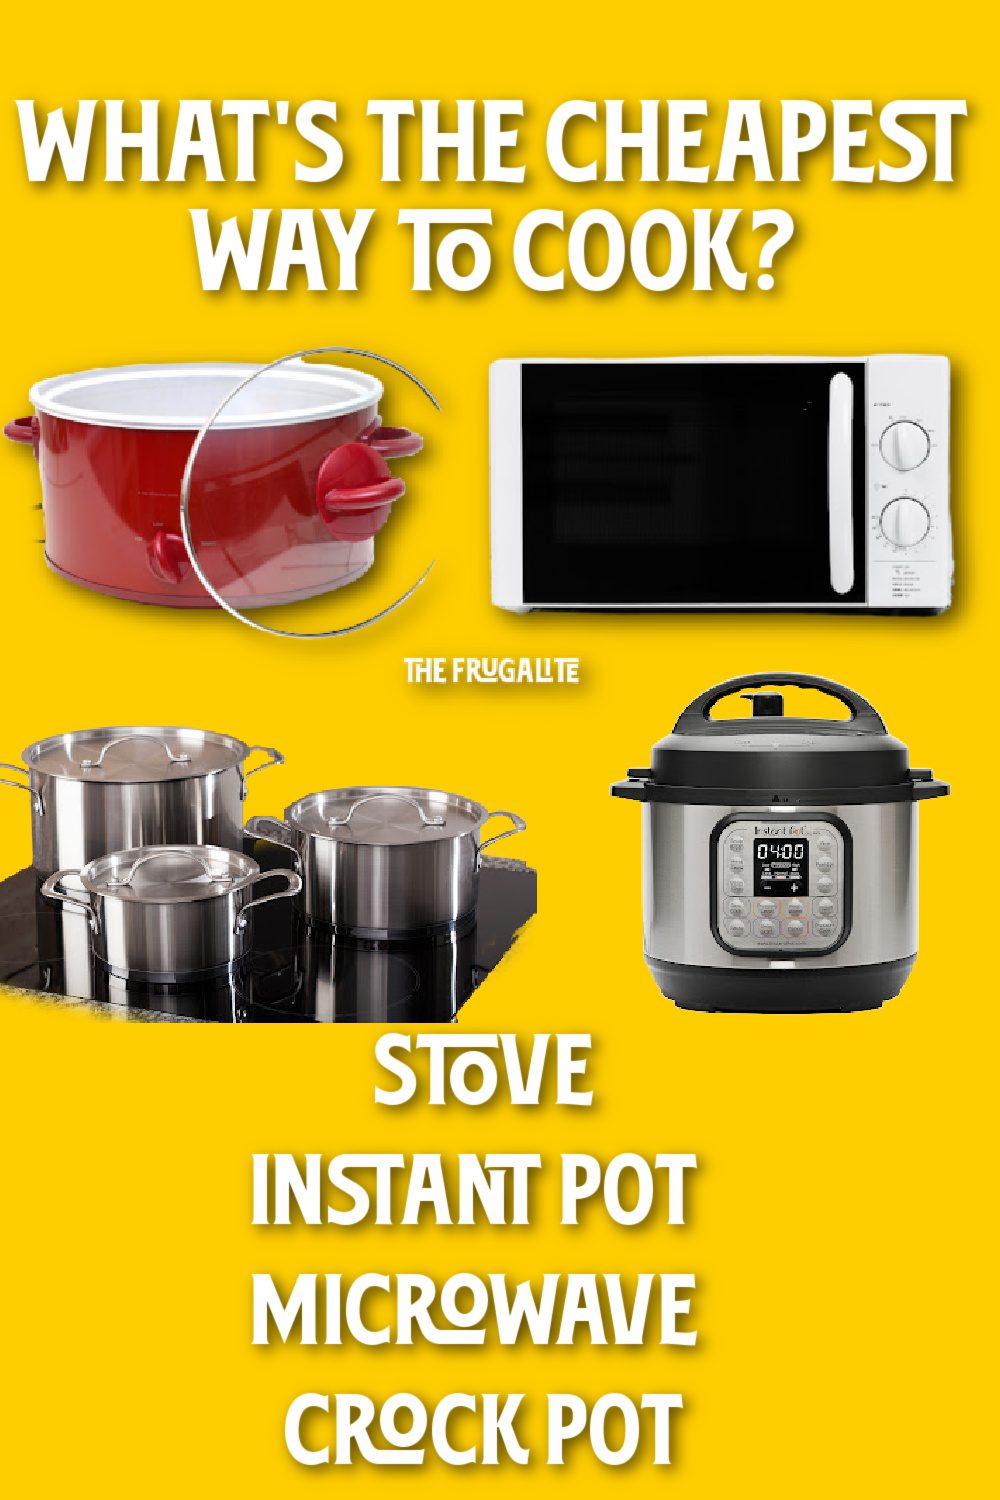 The Cheapest Way to Cook: Stove, Instant Pot, Microwave, or Crock Pot?